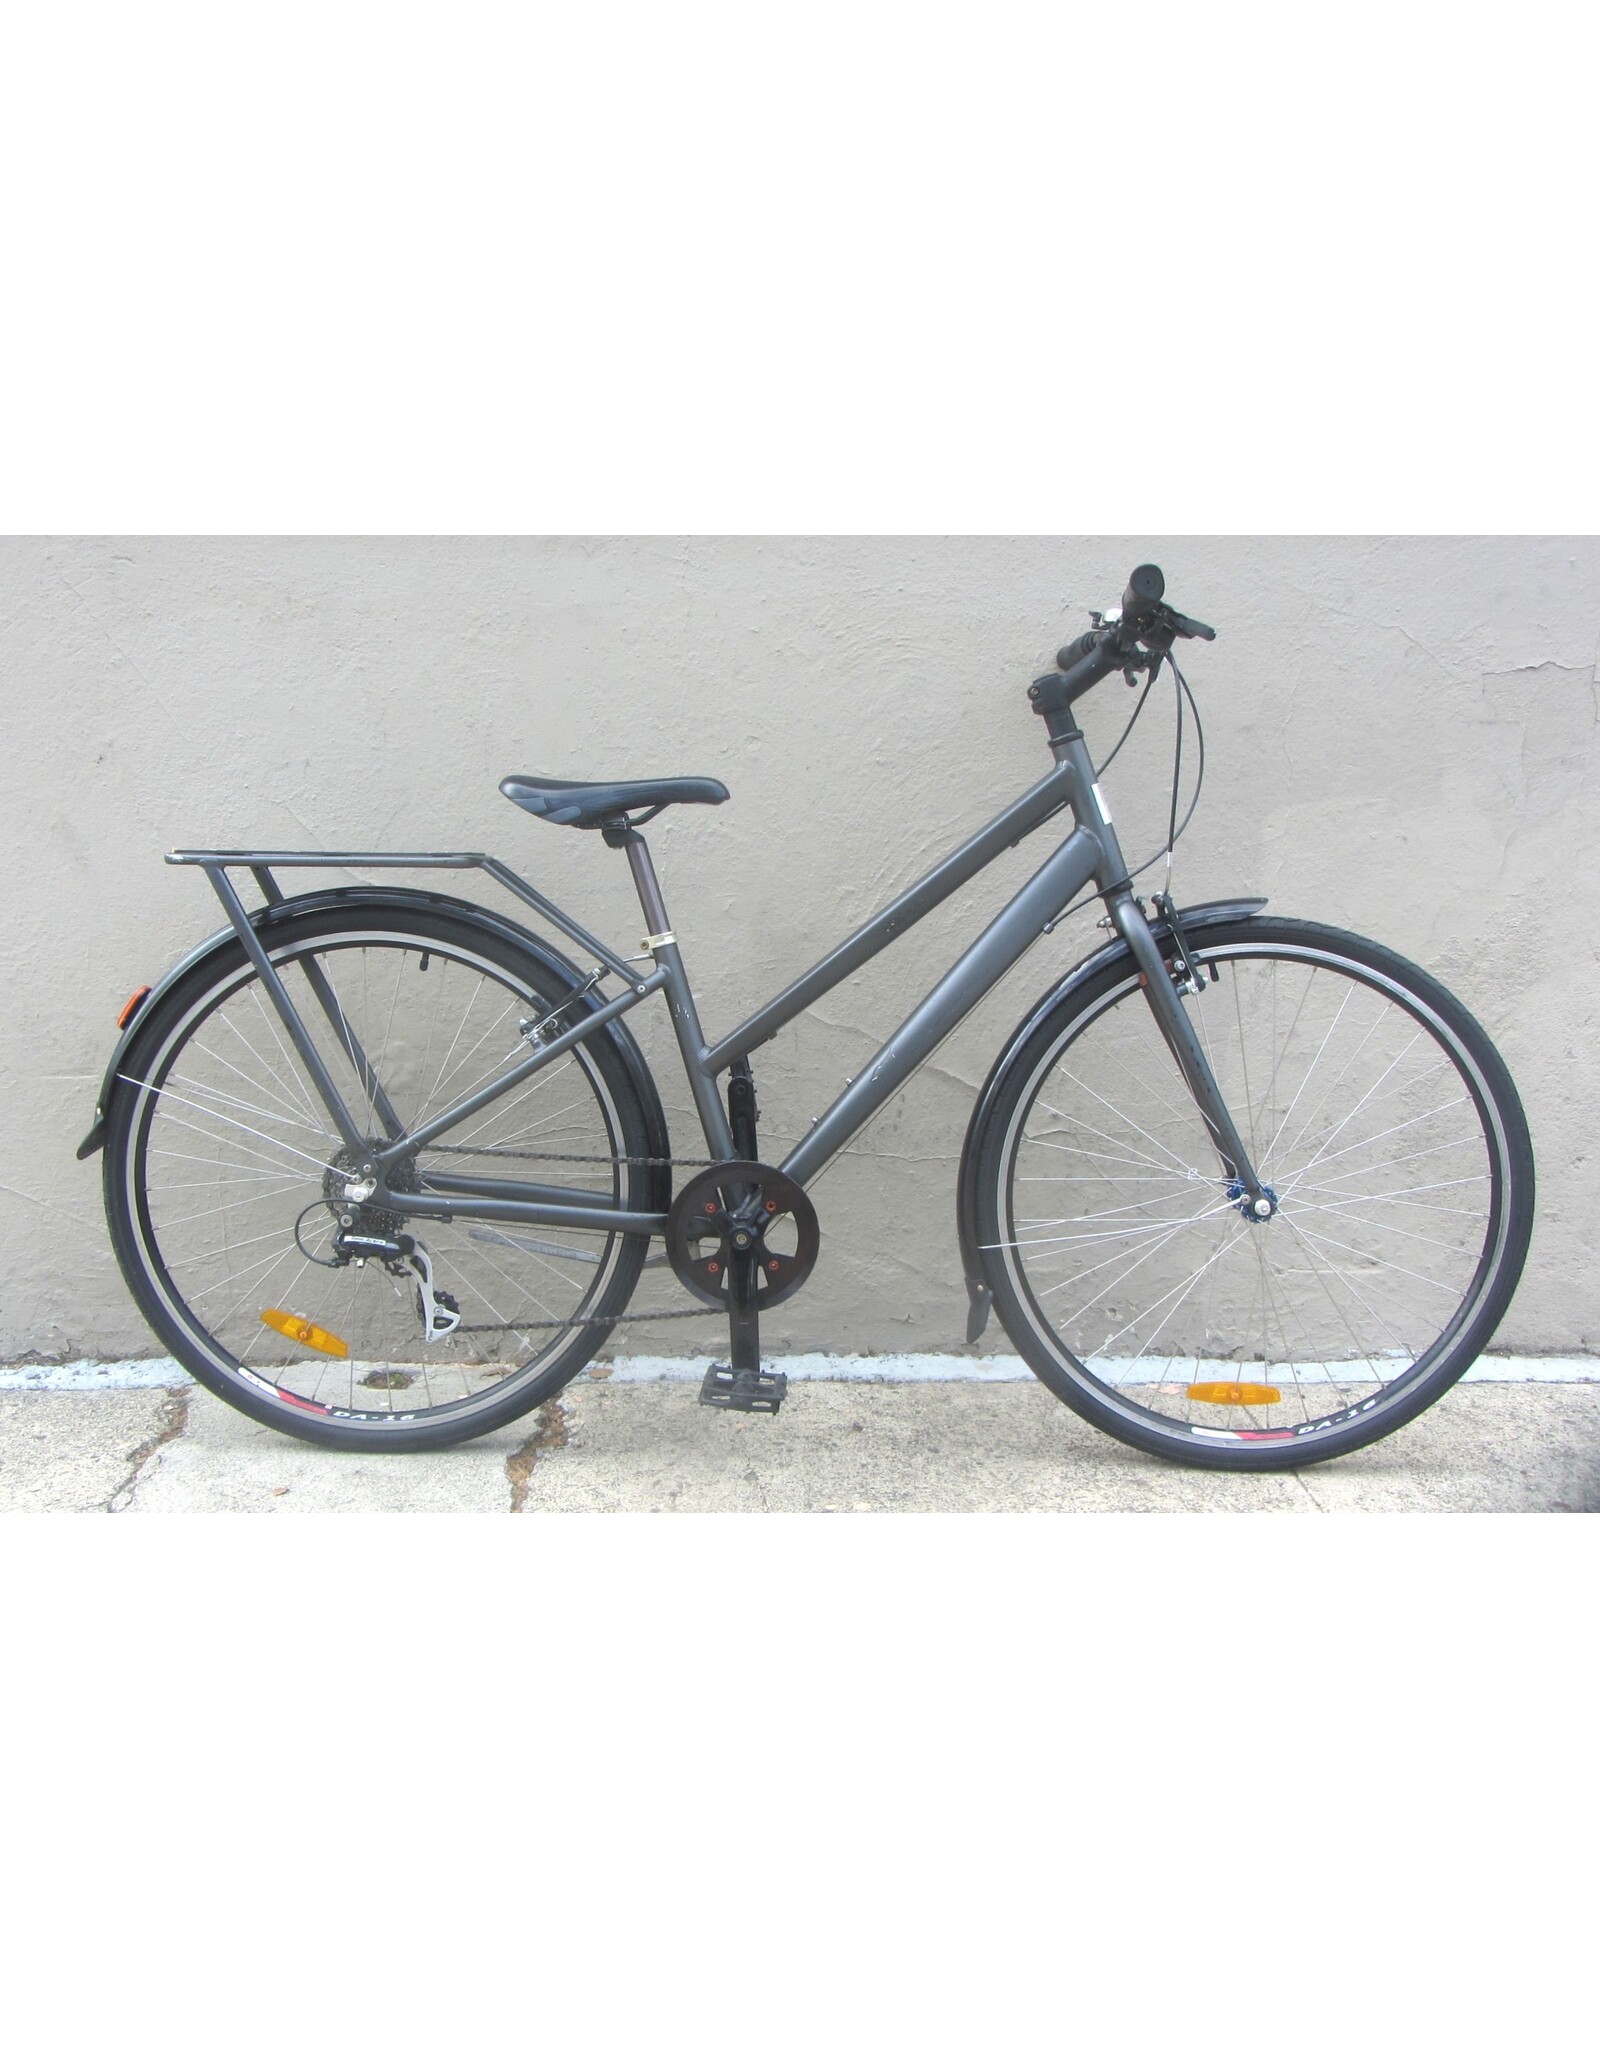 Republic Republic Fleet Bikes - Selection Available In-Store